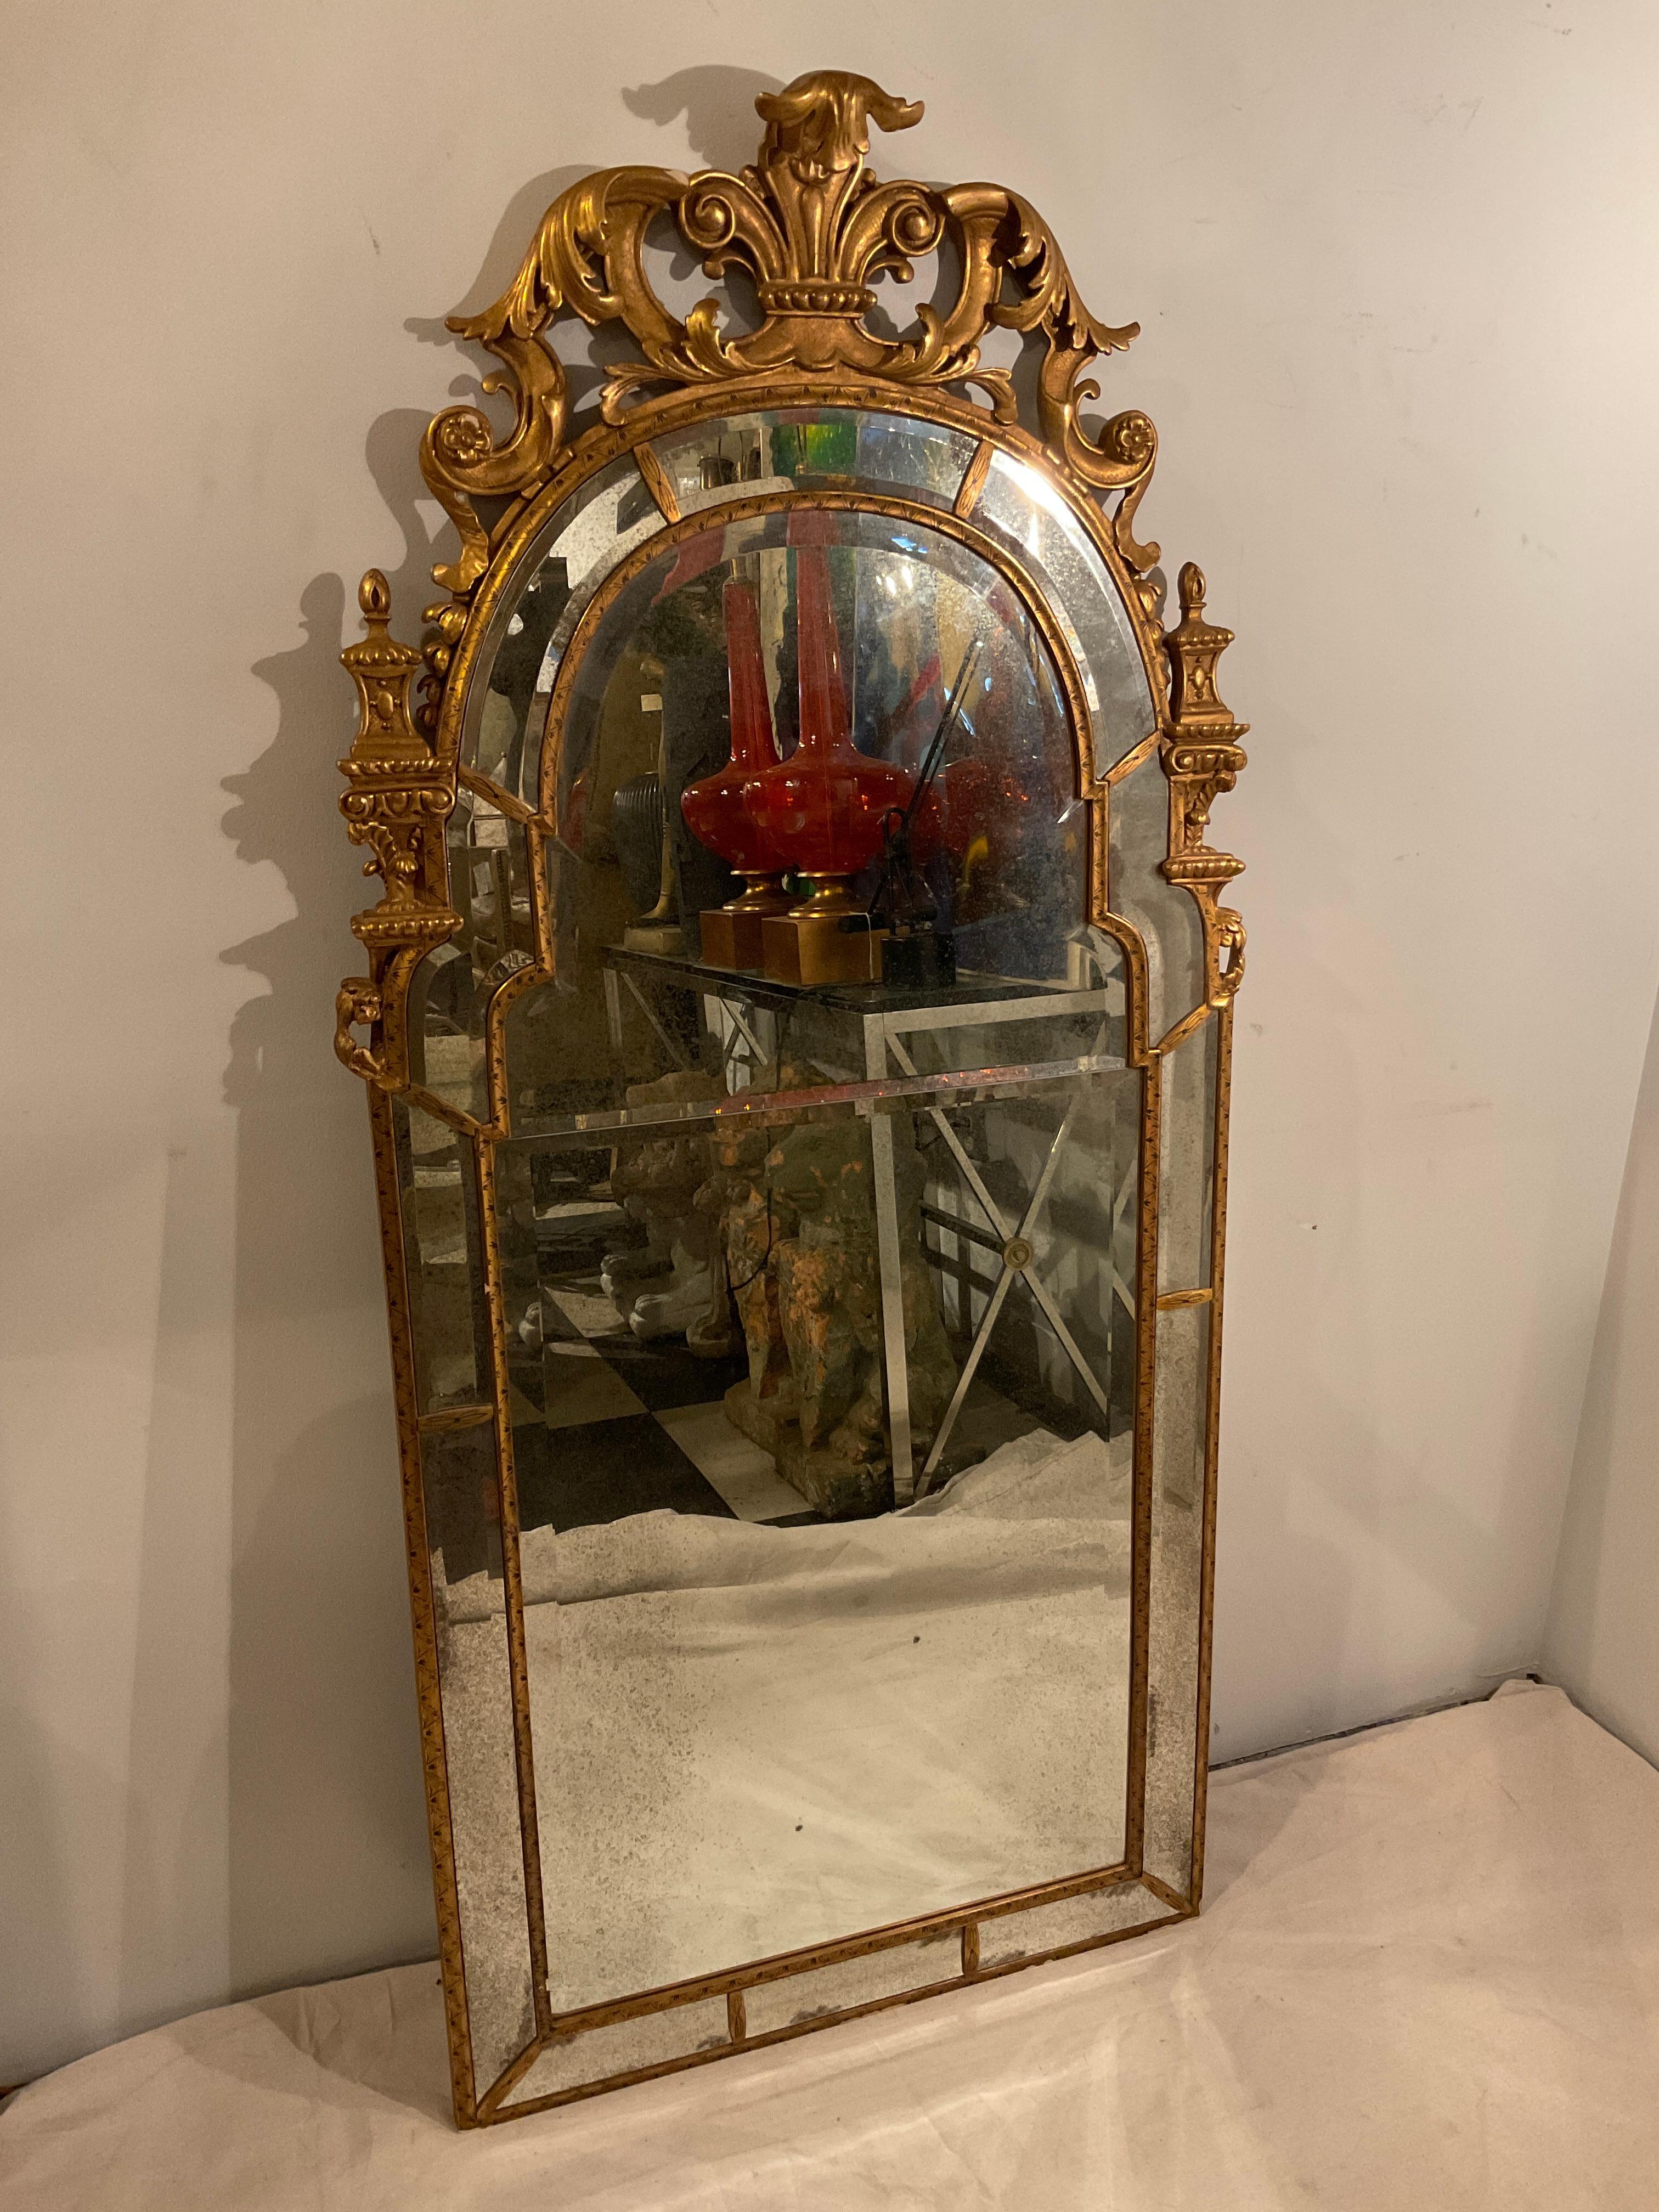 Mirror Fair reproduced this mirror that hangs in Chillingham Castle in England. The original is from 1700. Hand carved, gilt wood with painted details . Each piece of glass is beveled antiqued mirror. It’s a stunning mirror.